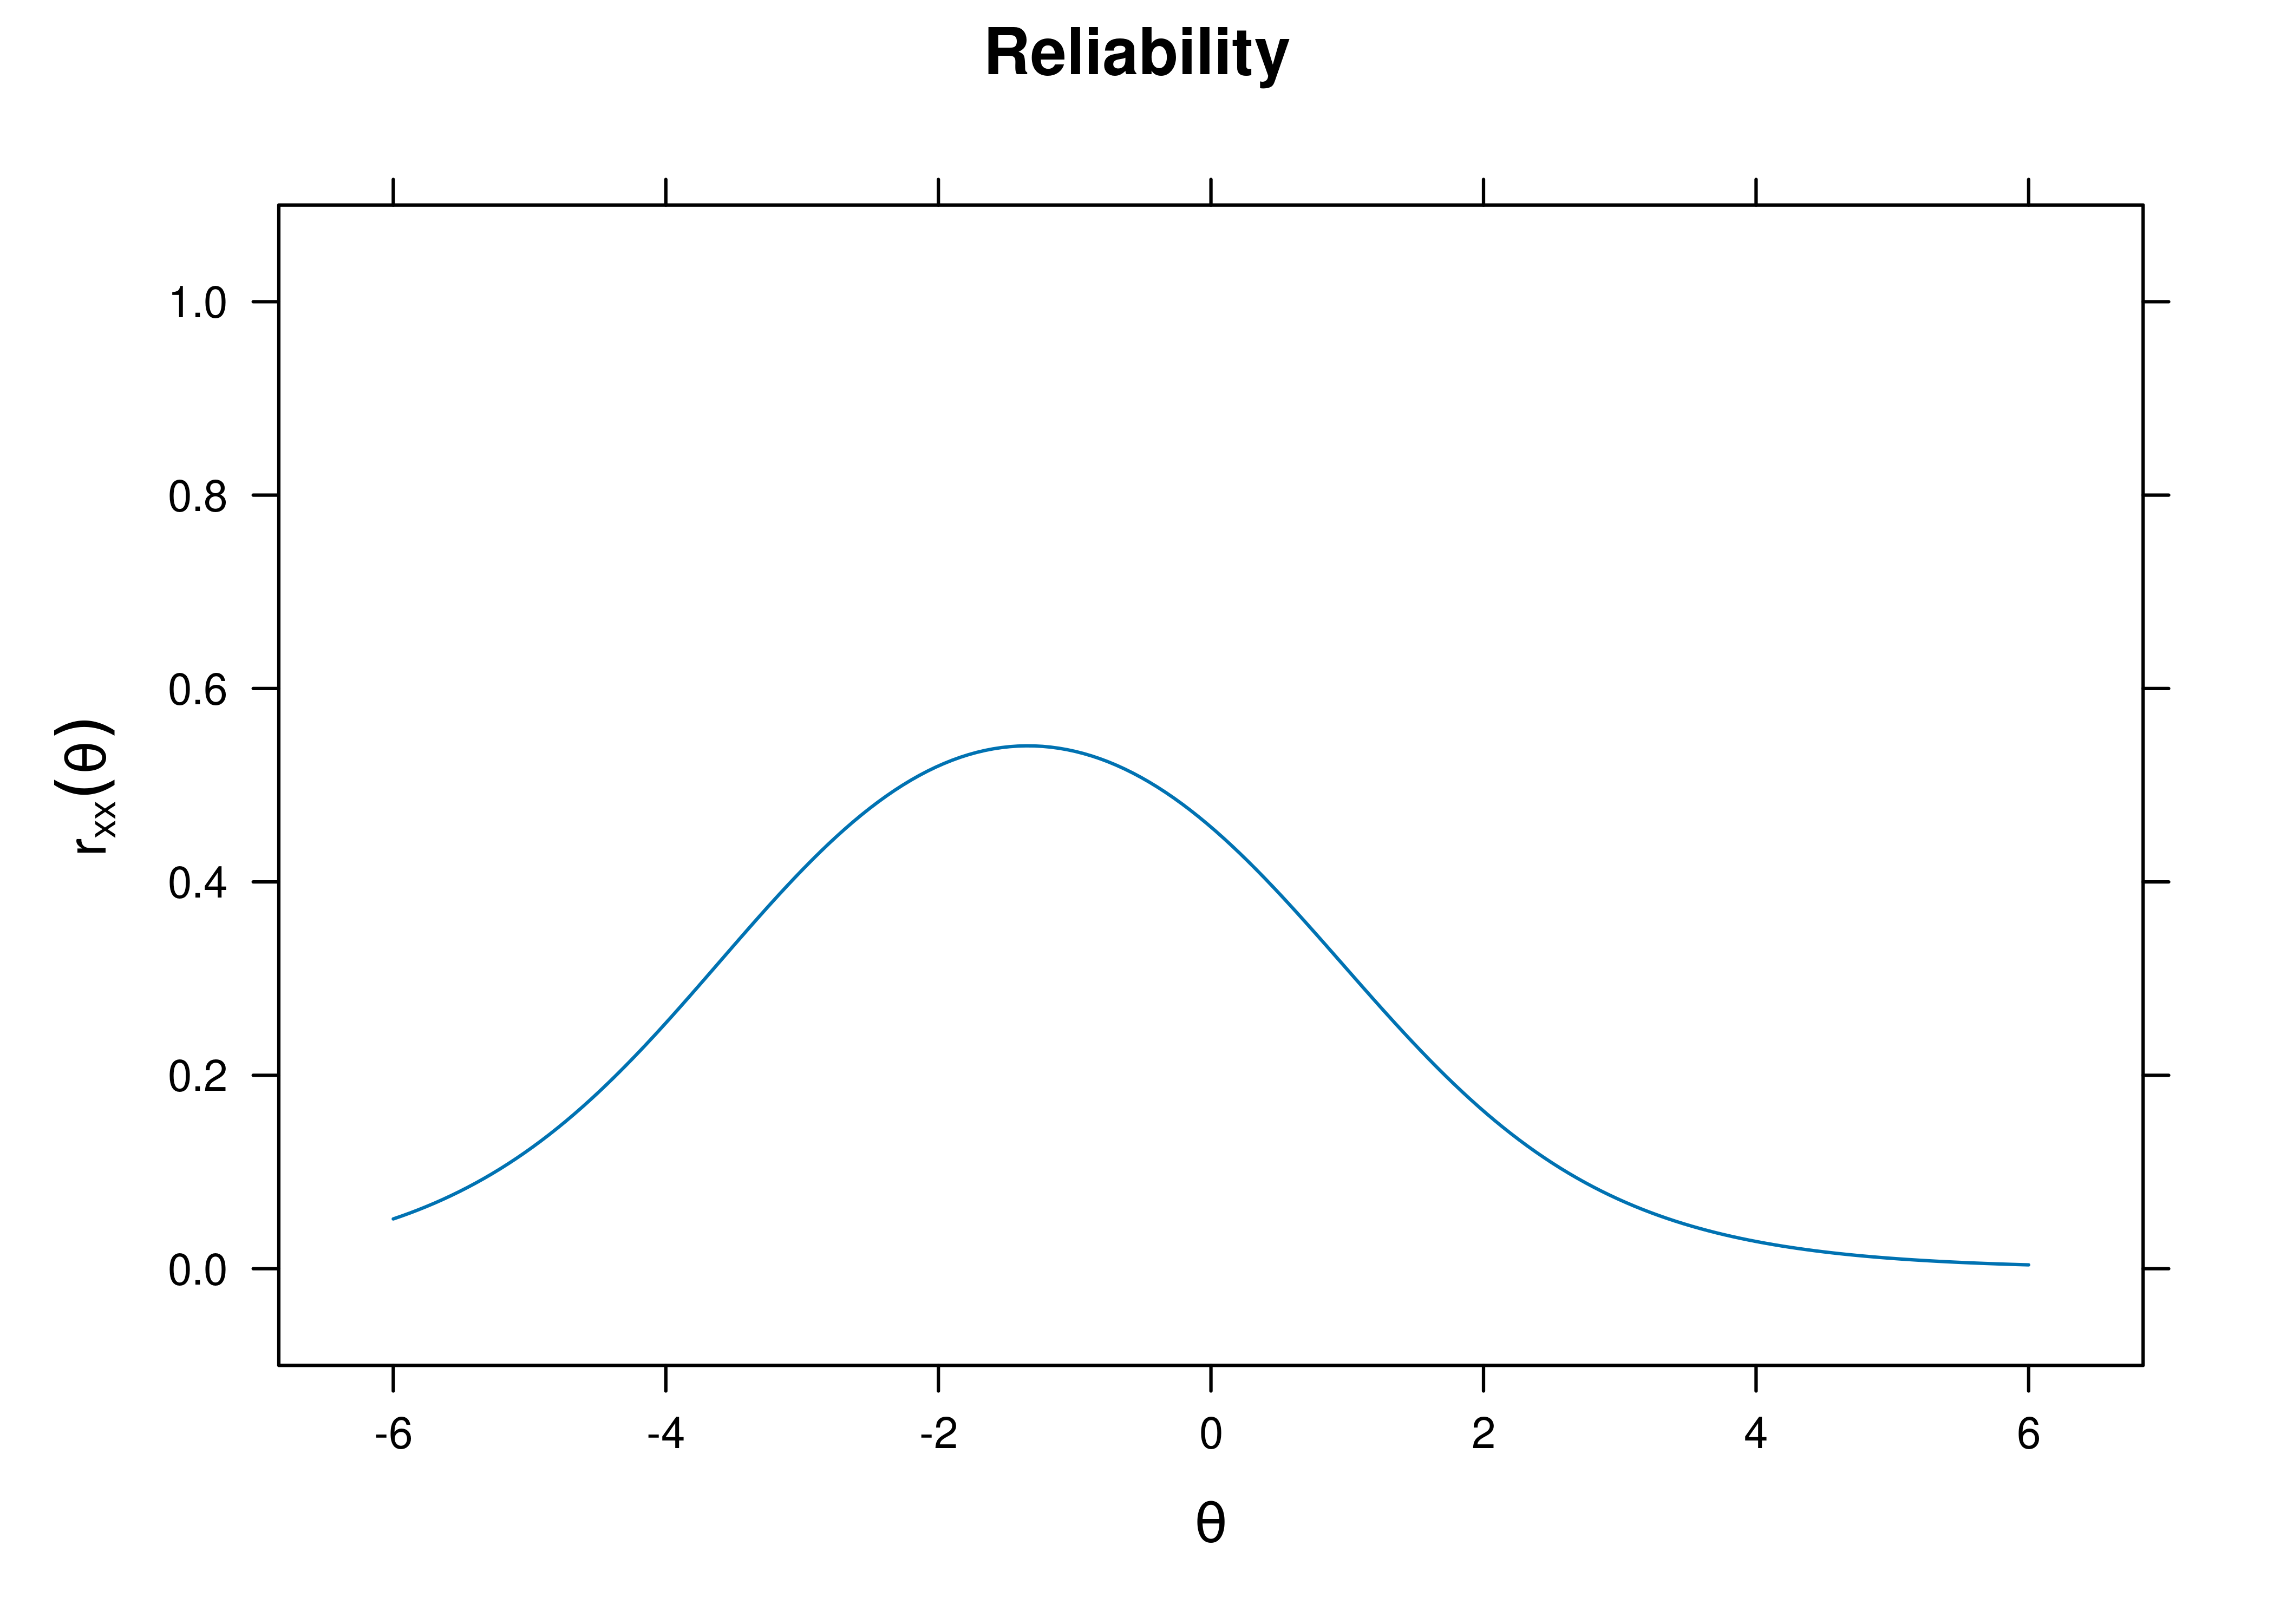 Test Reliability From Rasch Item Response Theory Model.